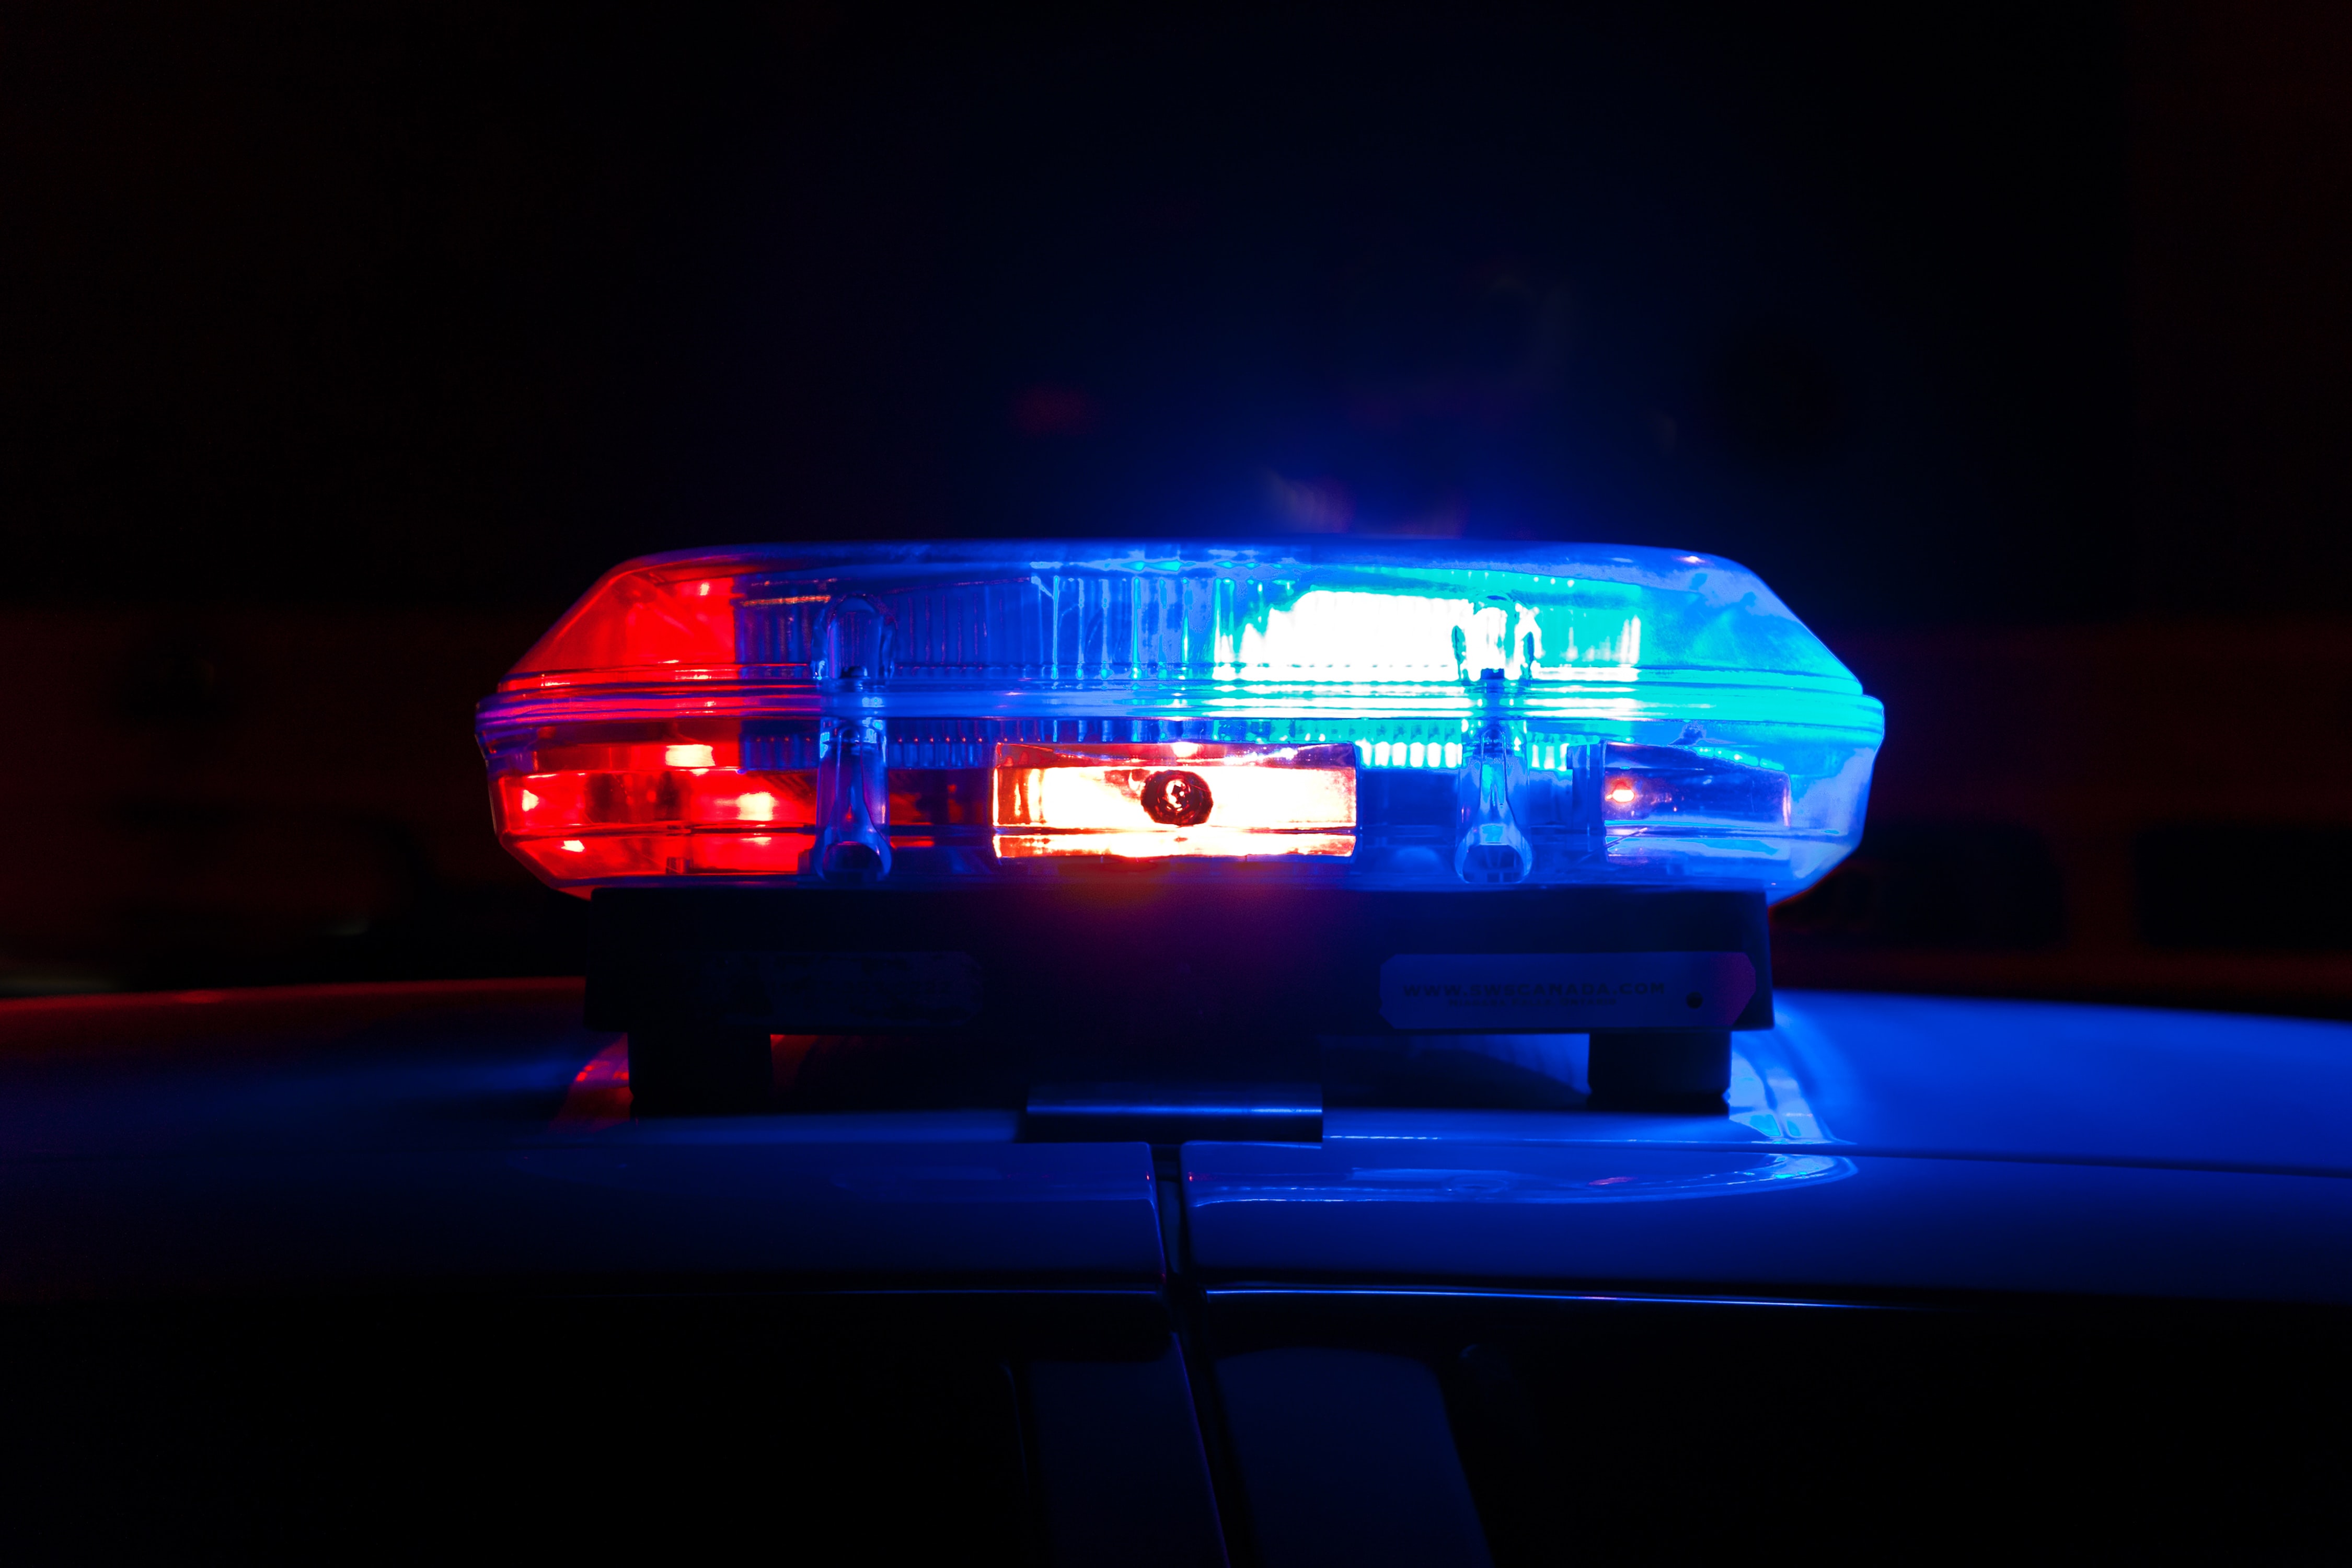 Blue and red police lights; image by Scott Rodgerson, via Unsplash.com.